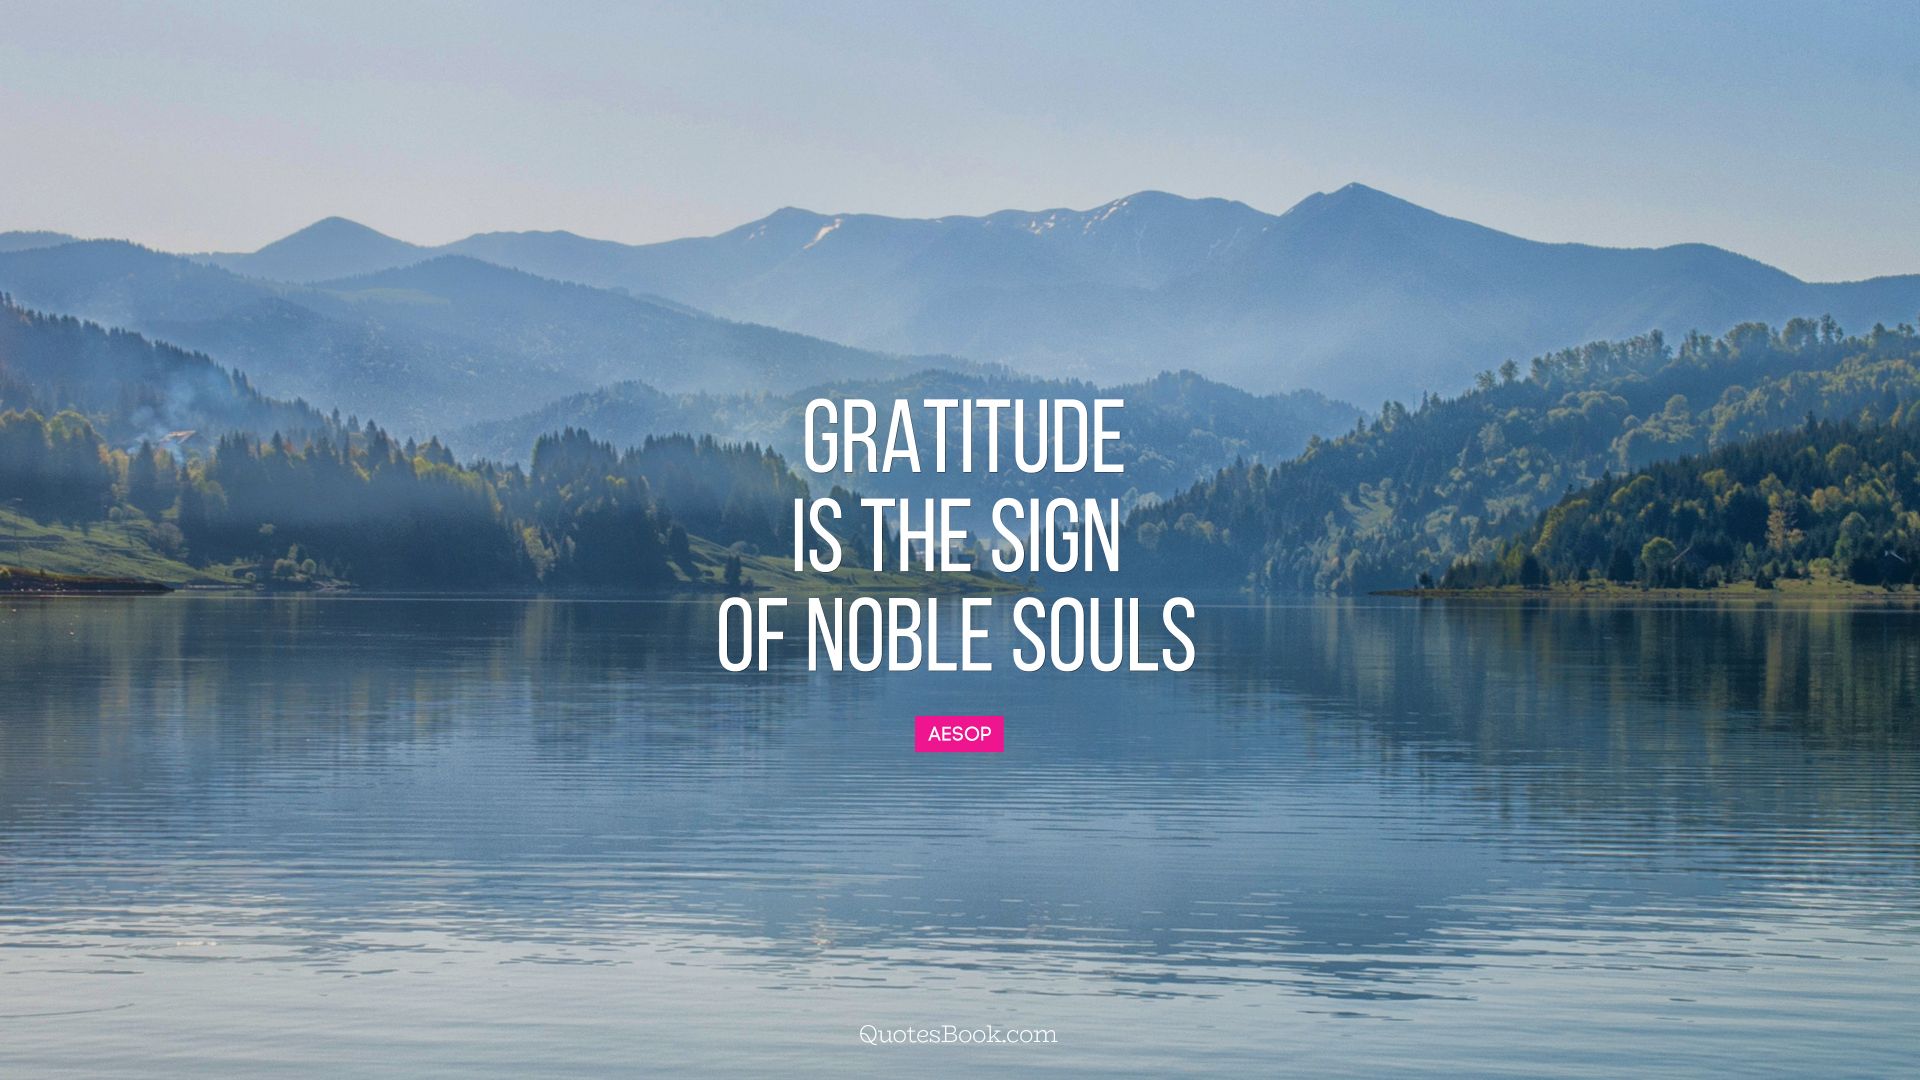 Gratitude is the sign of noble souls. - Quote by Aesop